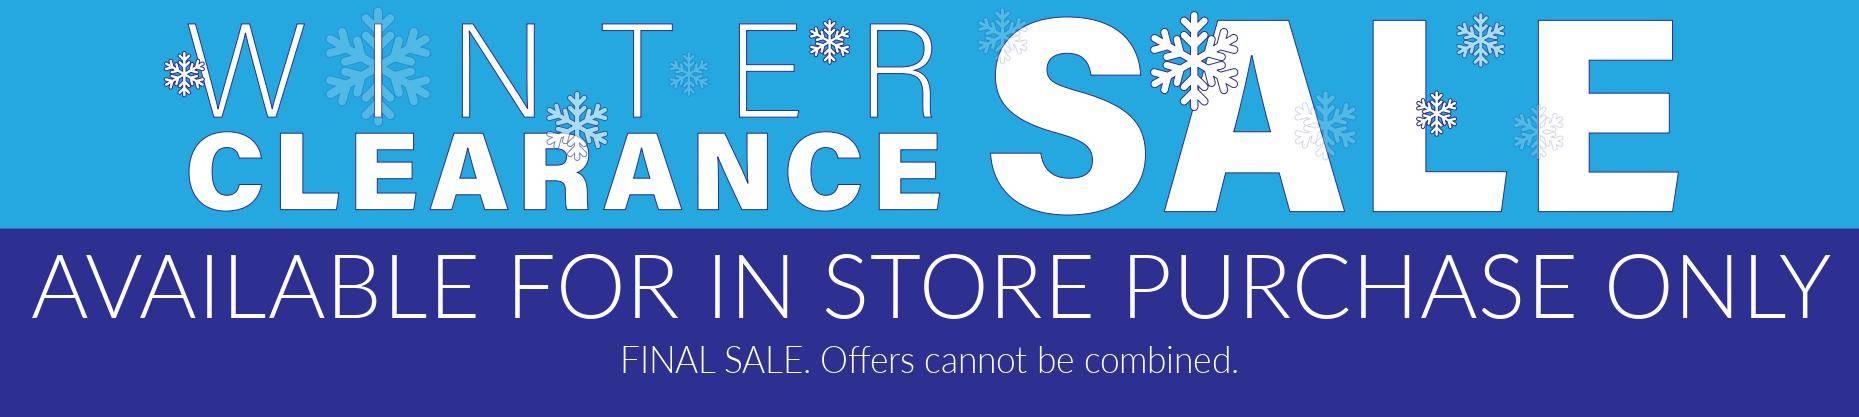 Winter Clearance Patio Furniture Sale - Available for In Store Purchase Only